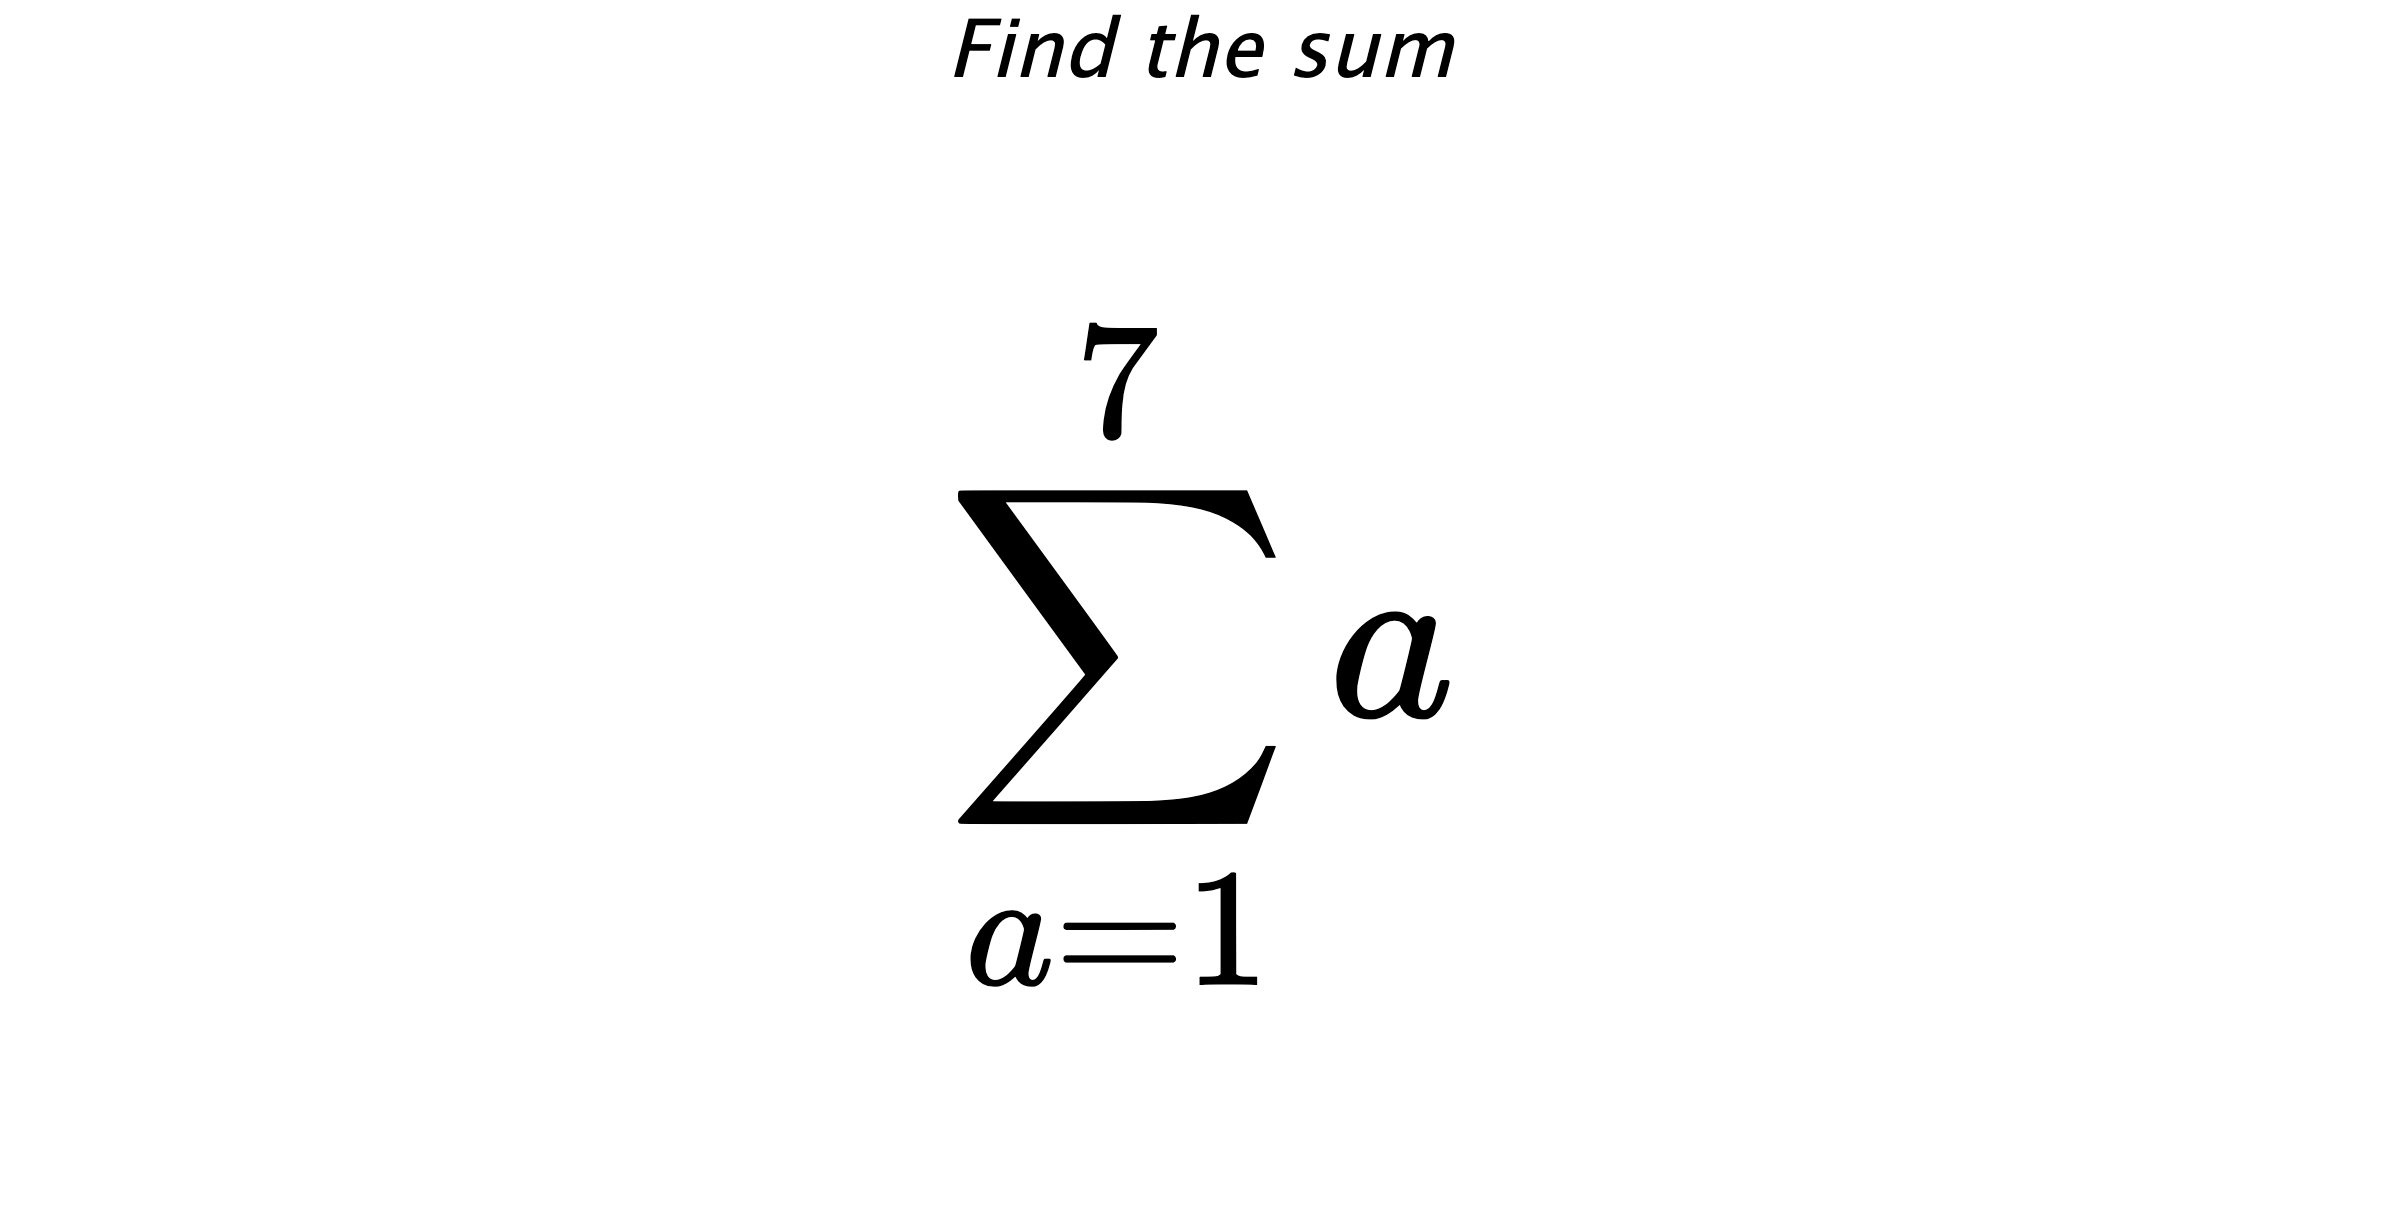 Find the sum $$ \sum_{a=1}^{7} a$$